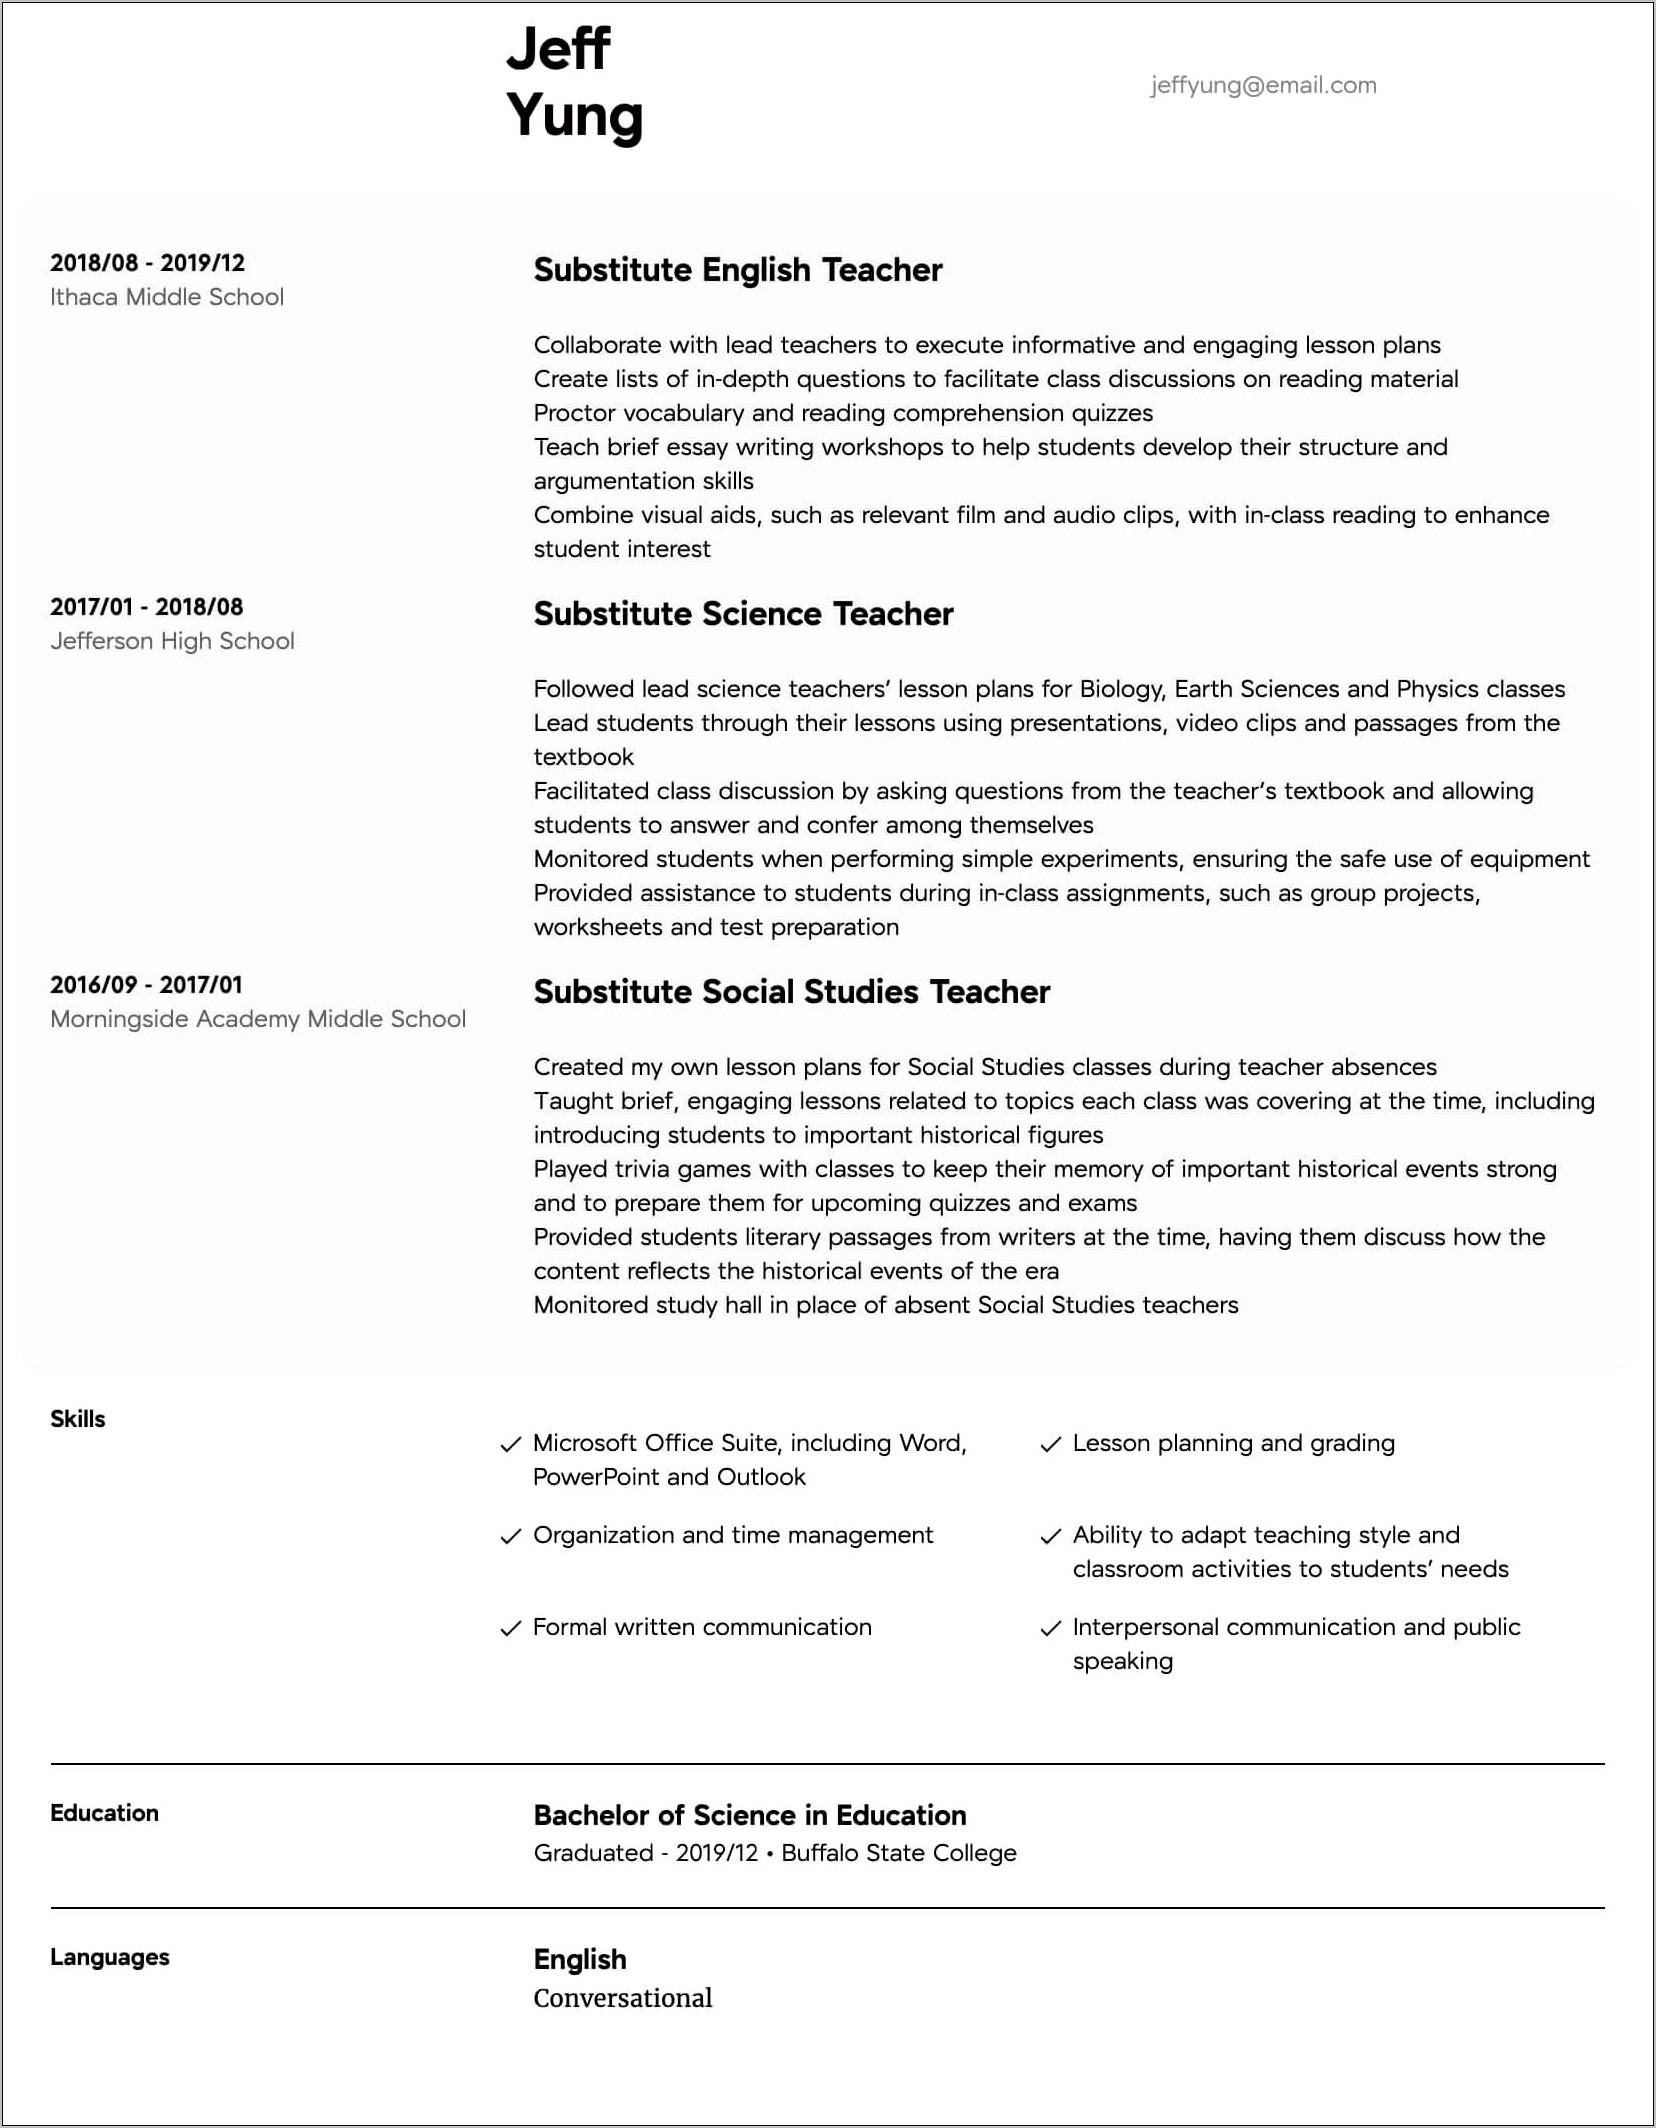 Examples Of Professional Resumes For Teachers